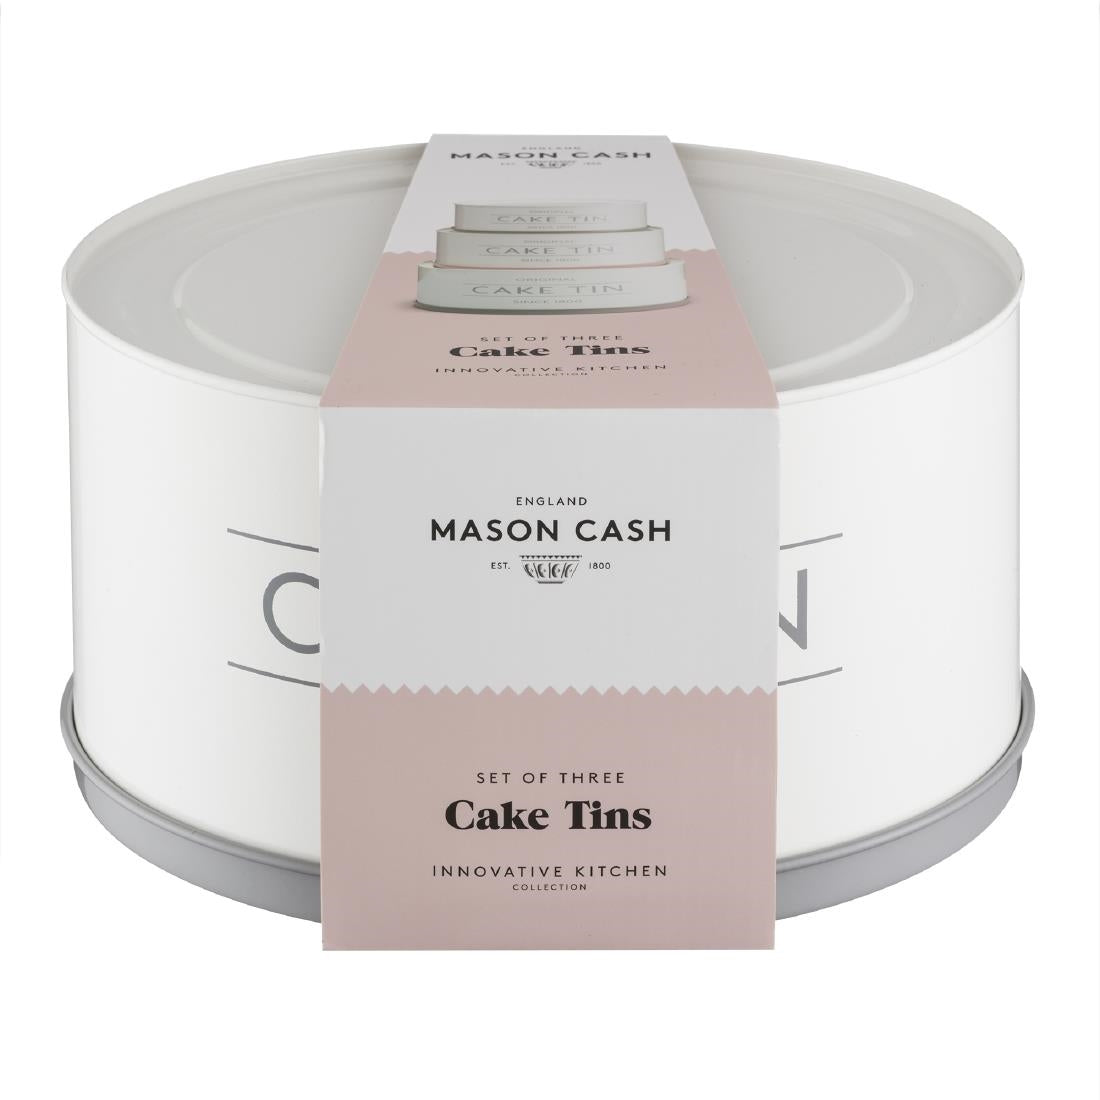 FX040 Mason Cash Innovative Kitchen Collection Set of 3 Cake Storage Tins JD Catering Equipment Solutions Ltd